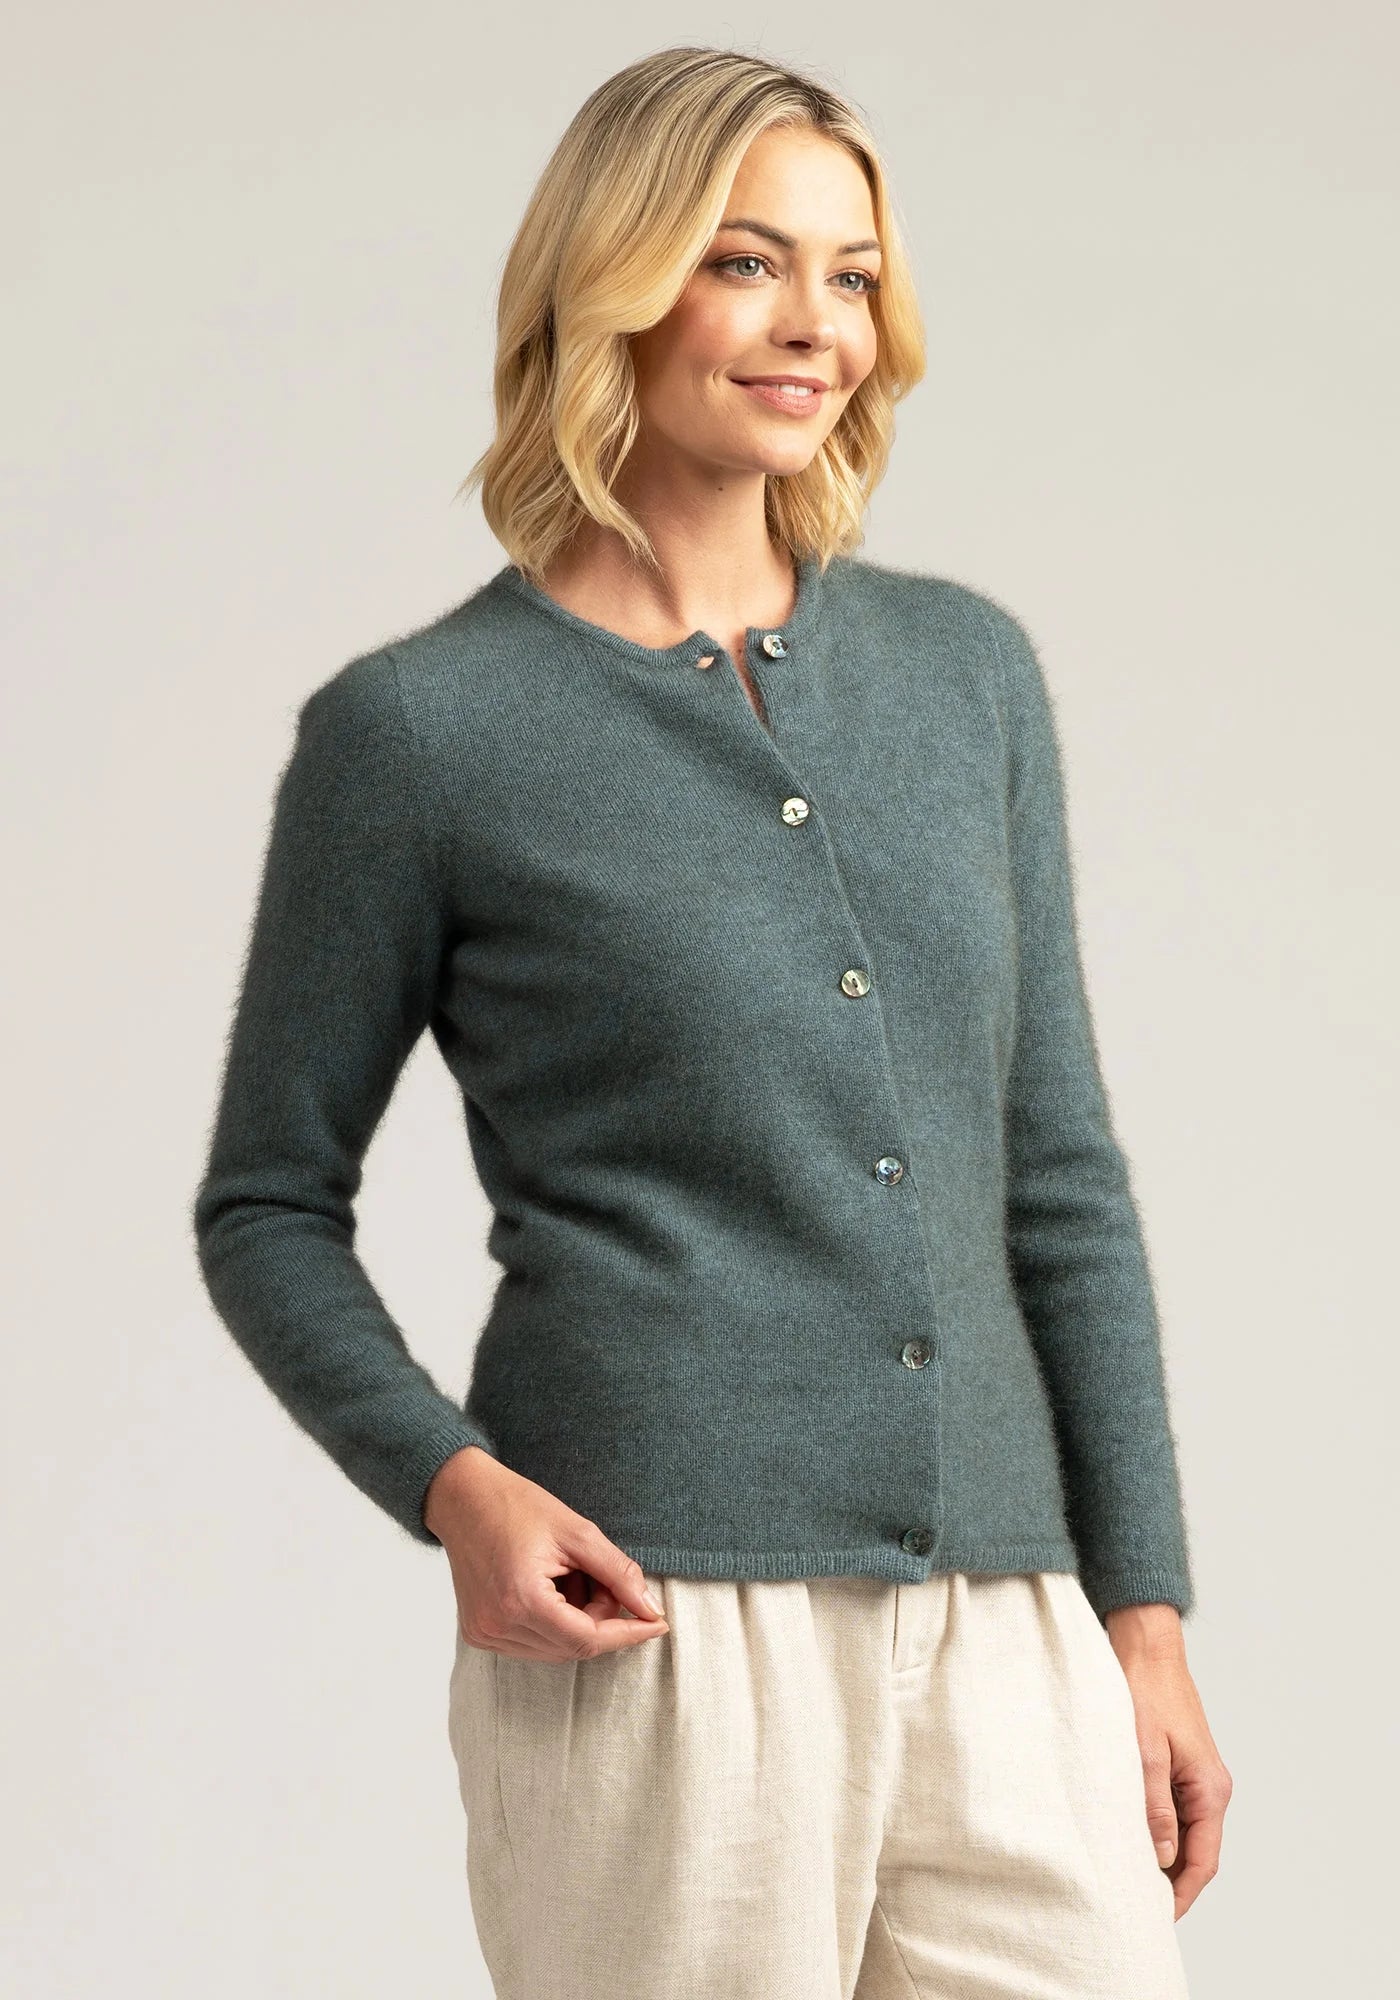 Effortless elegance: Pure Merino wool grey button up sweater, versatile, and irresistibly soft. Buy yours today!